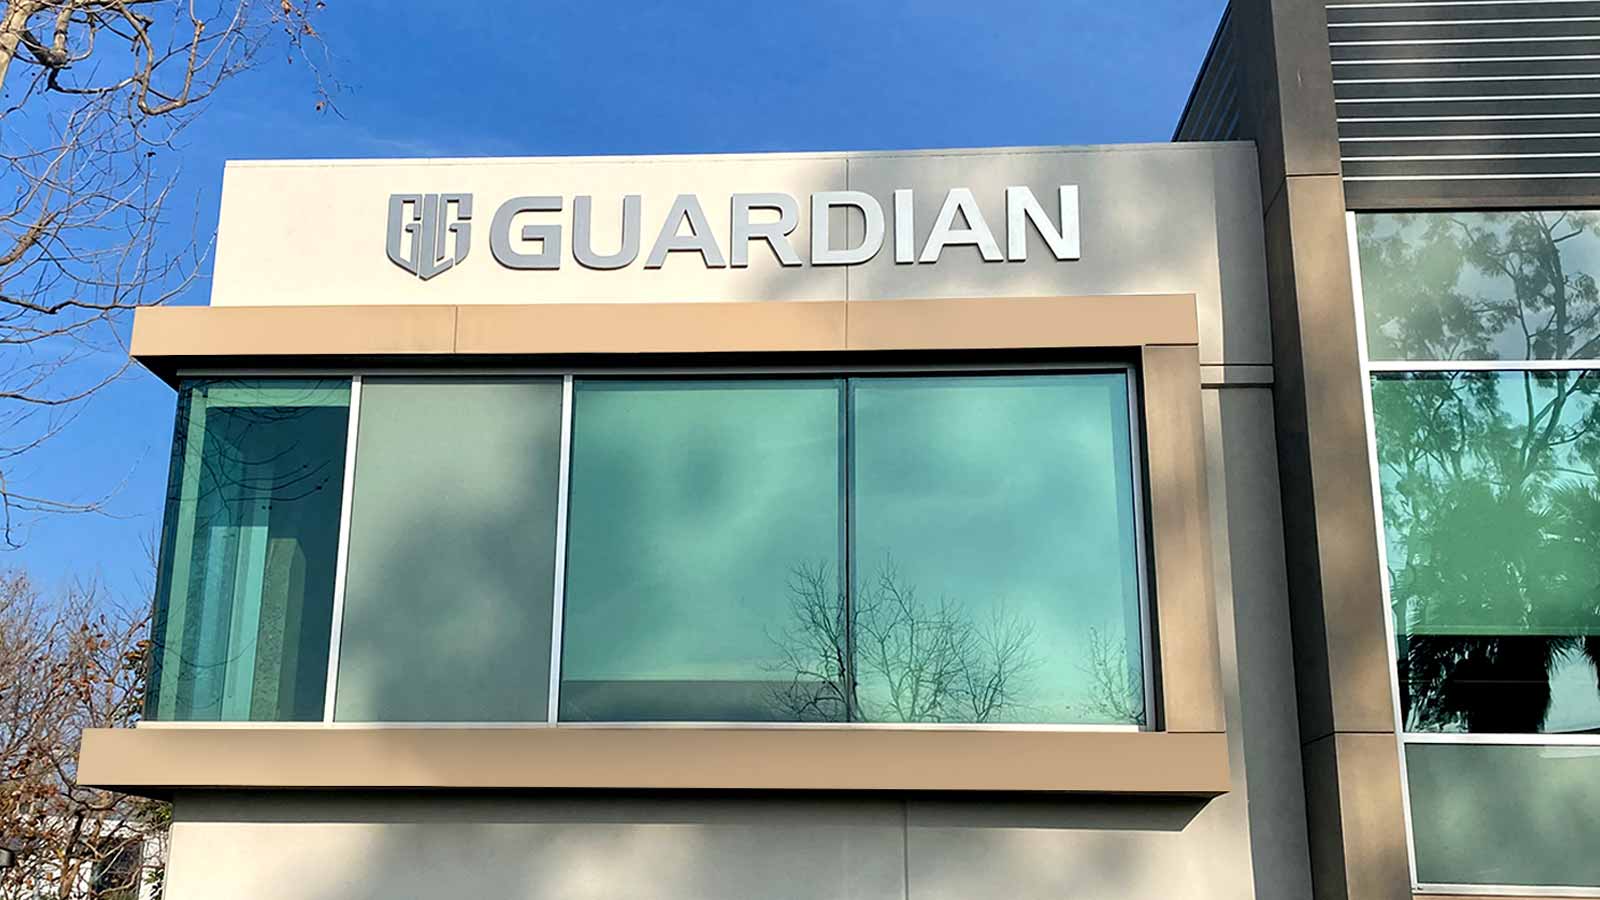 guardian litigation group building sign mounted on a facade